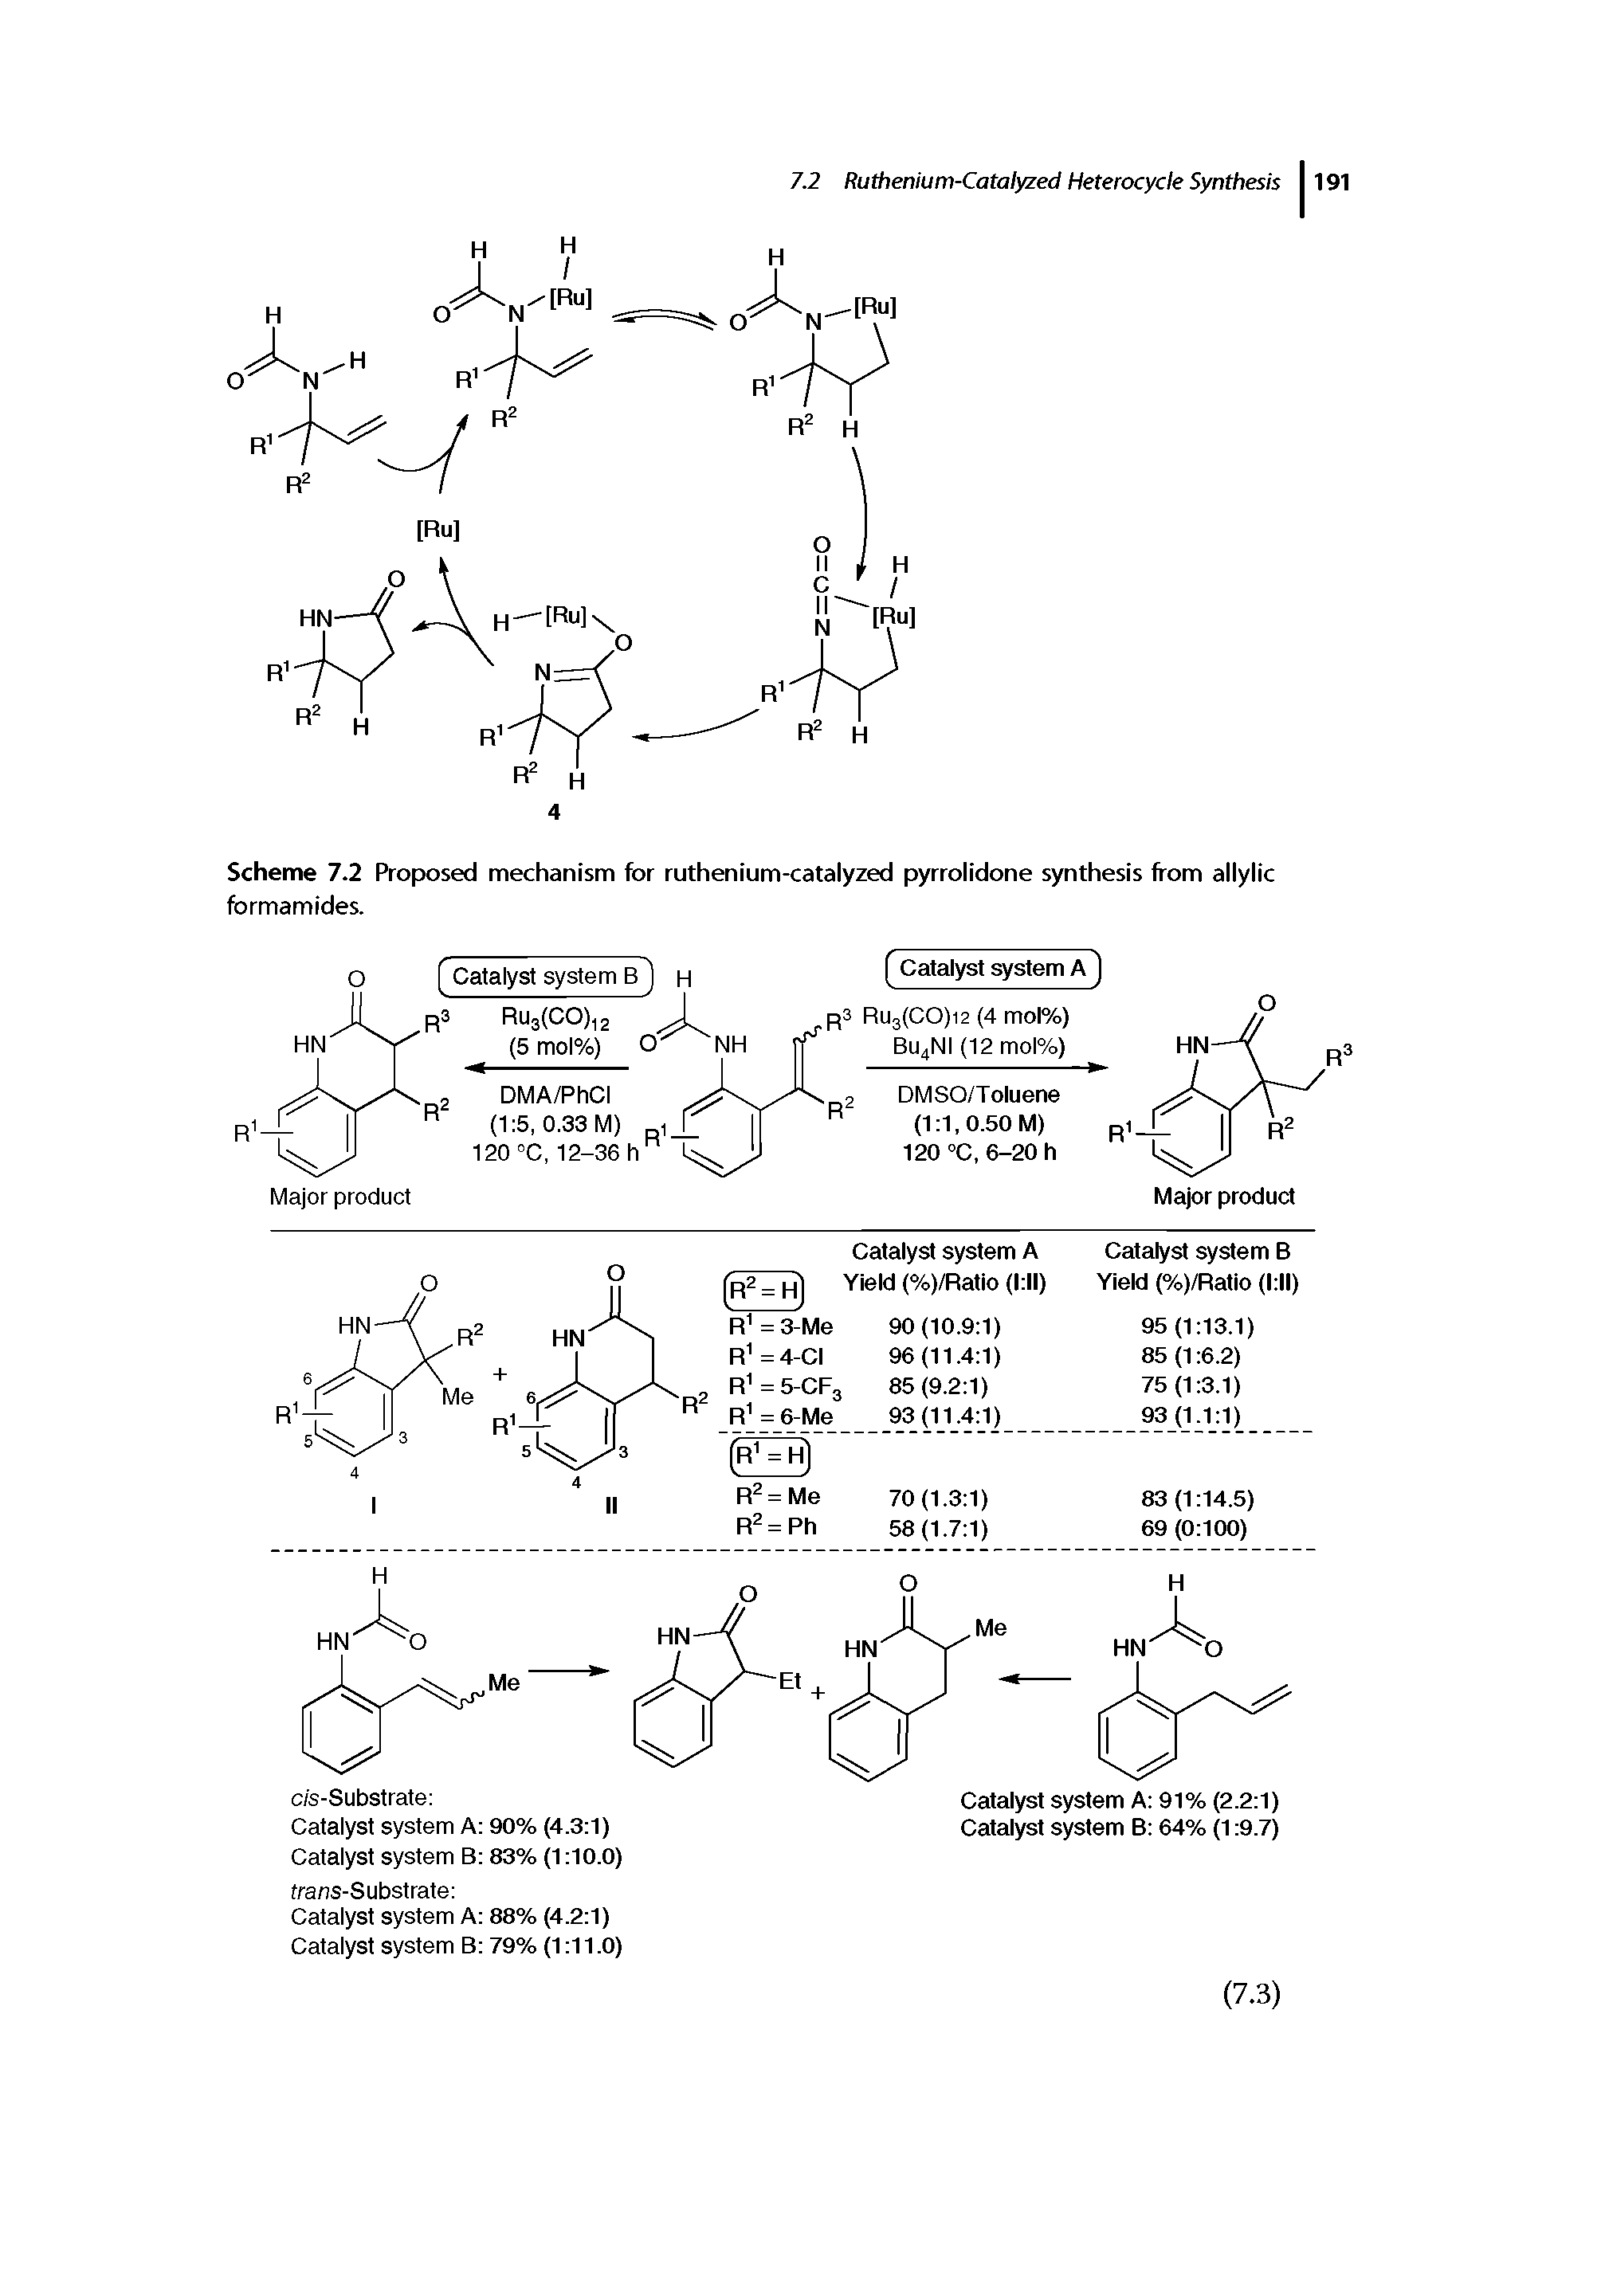 Scheme 7.2 Proposed mechanism for ruthenium-catalyzed pyrrolidone synthesis from allylic formamides.